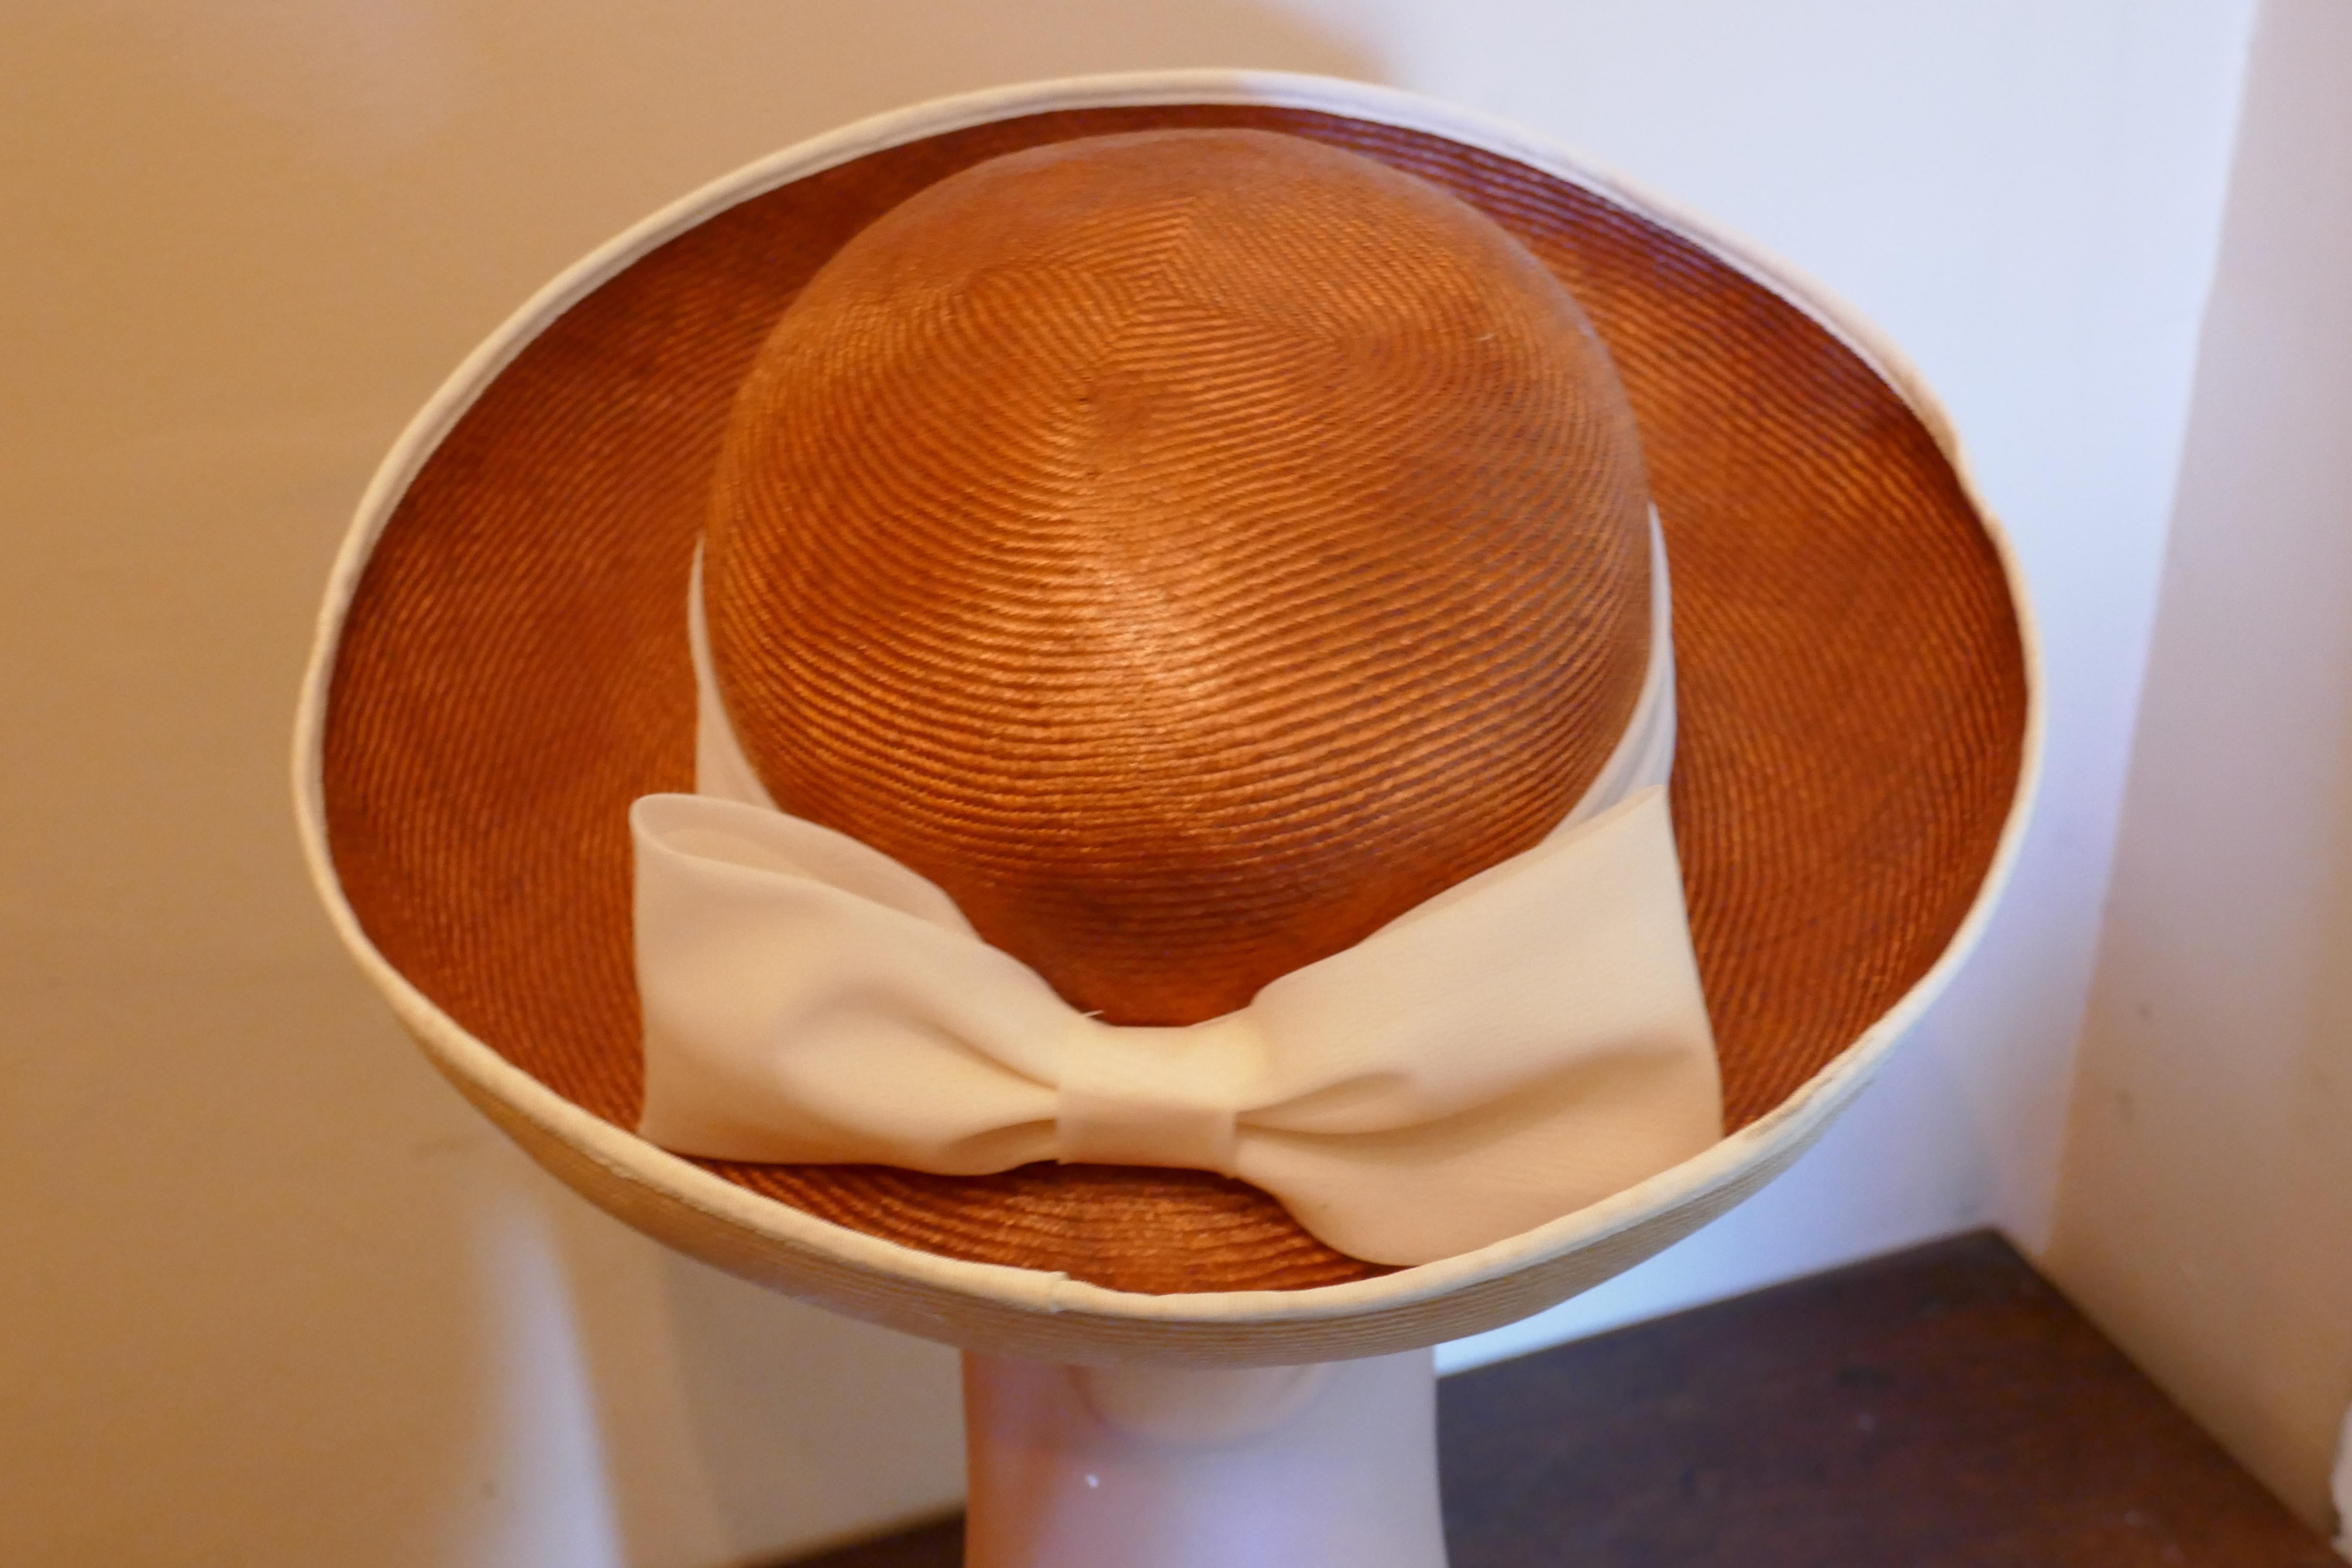 Original 1960s Panama Hat trimmed with Chiffon Ribbon by James Egleton

This is a very elegant hat, it is made in 2 tone soft shiny straw fabric with wide upturned brim, the main colour is  a beautiful bronze and the underside of the brim is cream,